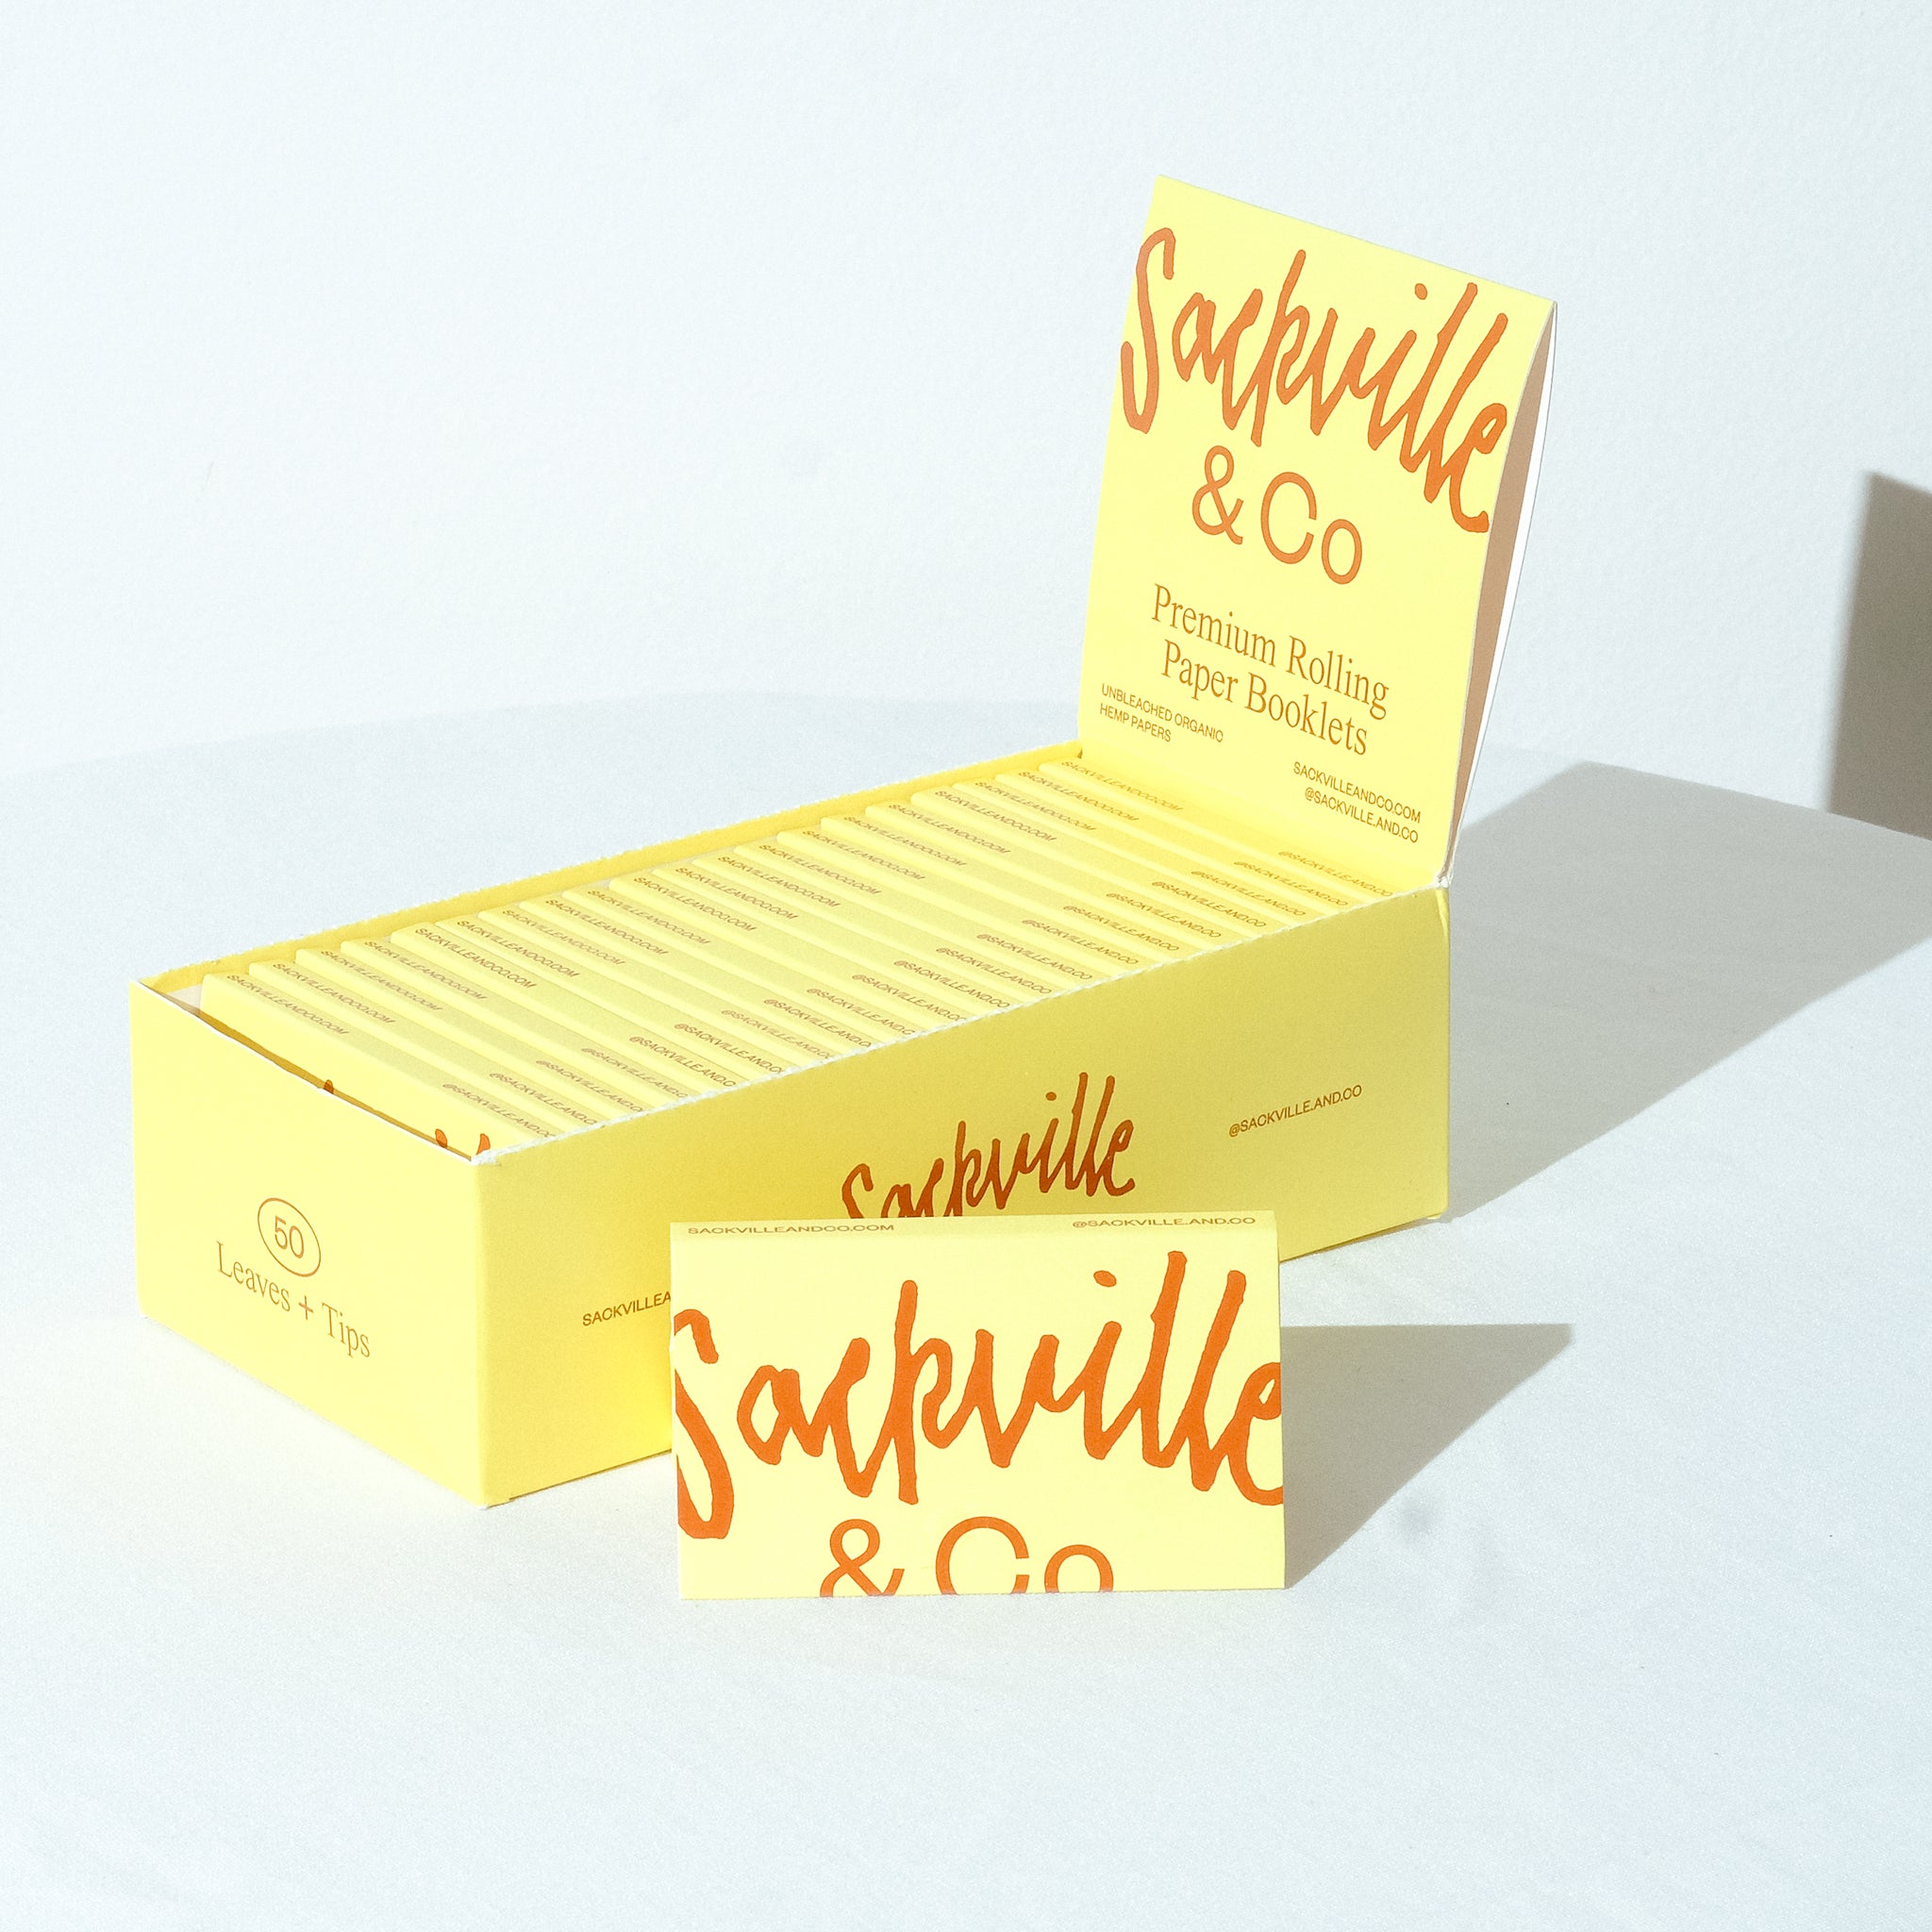 Sackville & Co Rolling Papers